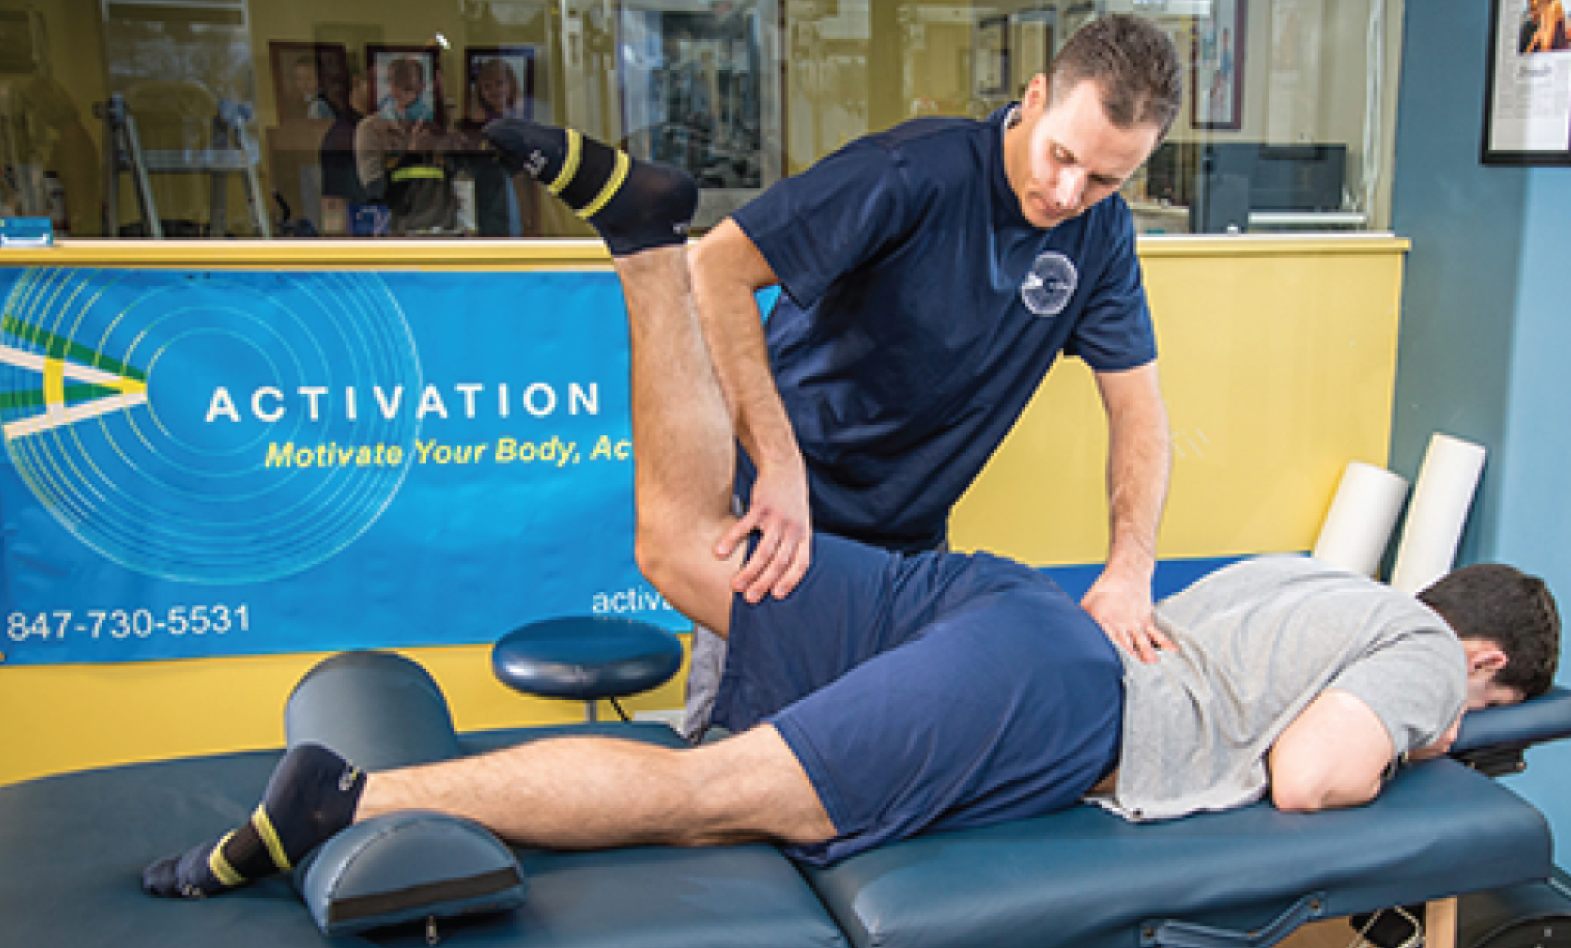 Activation-Fitness-Steve-and-Client-on-Table